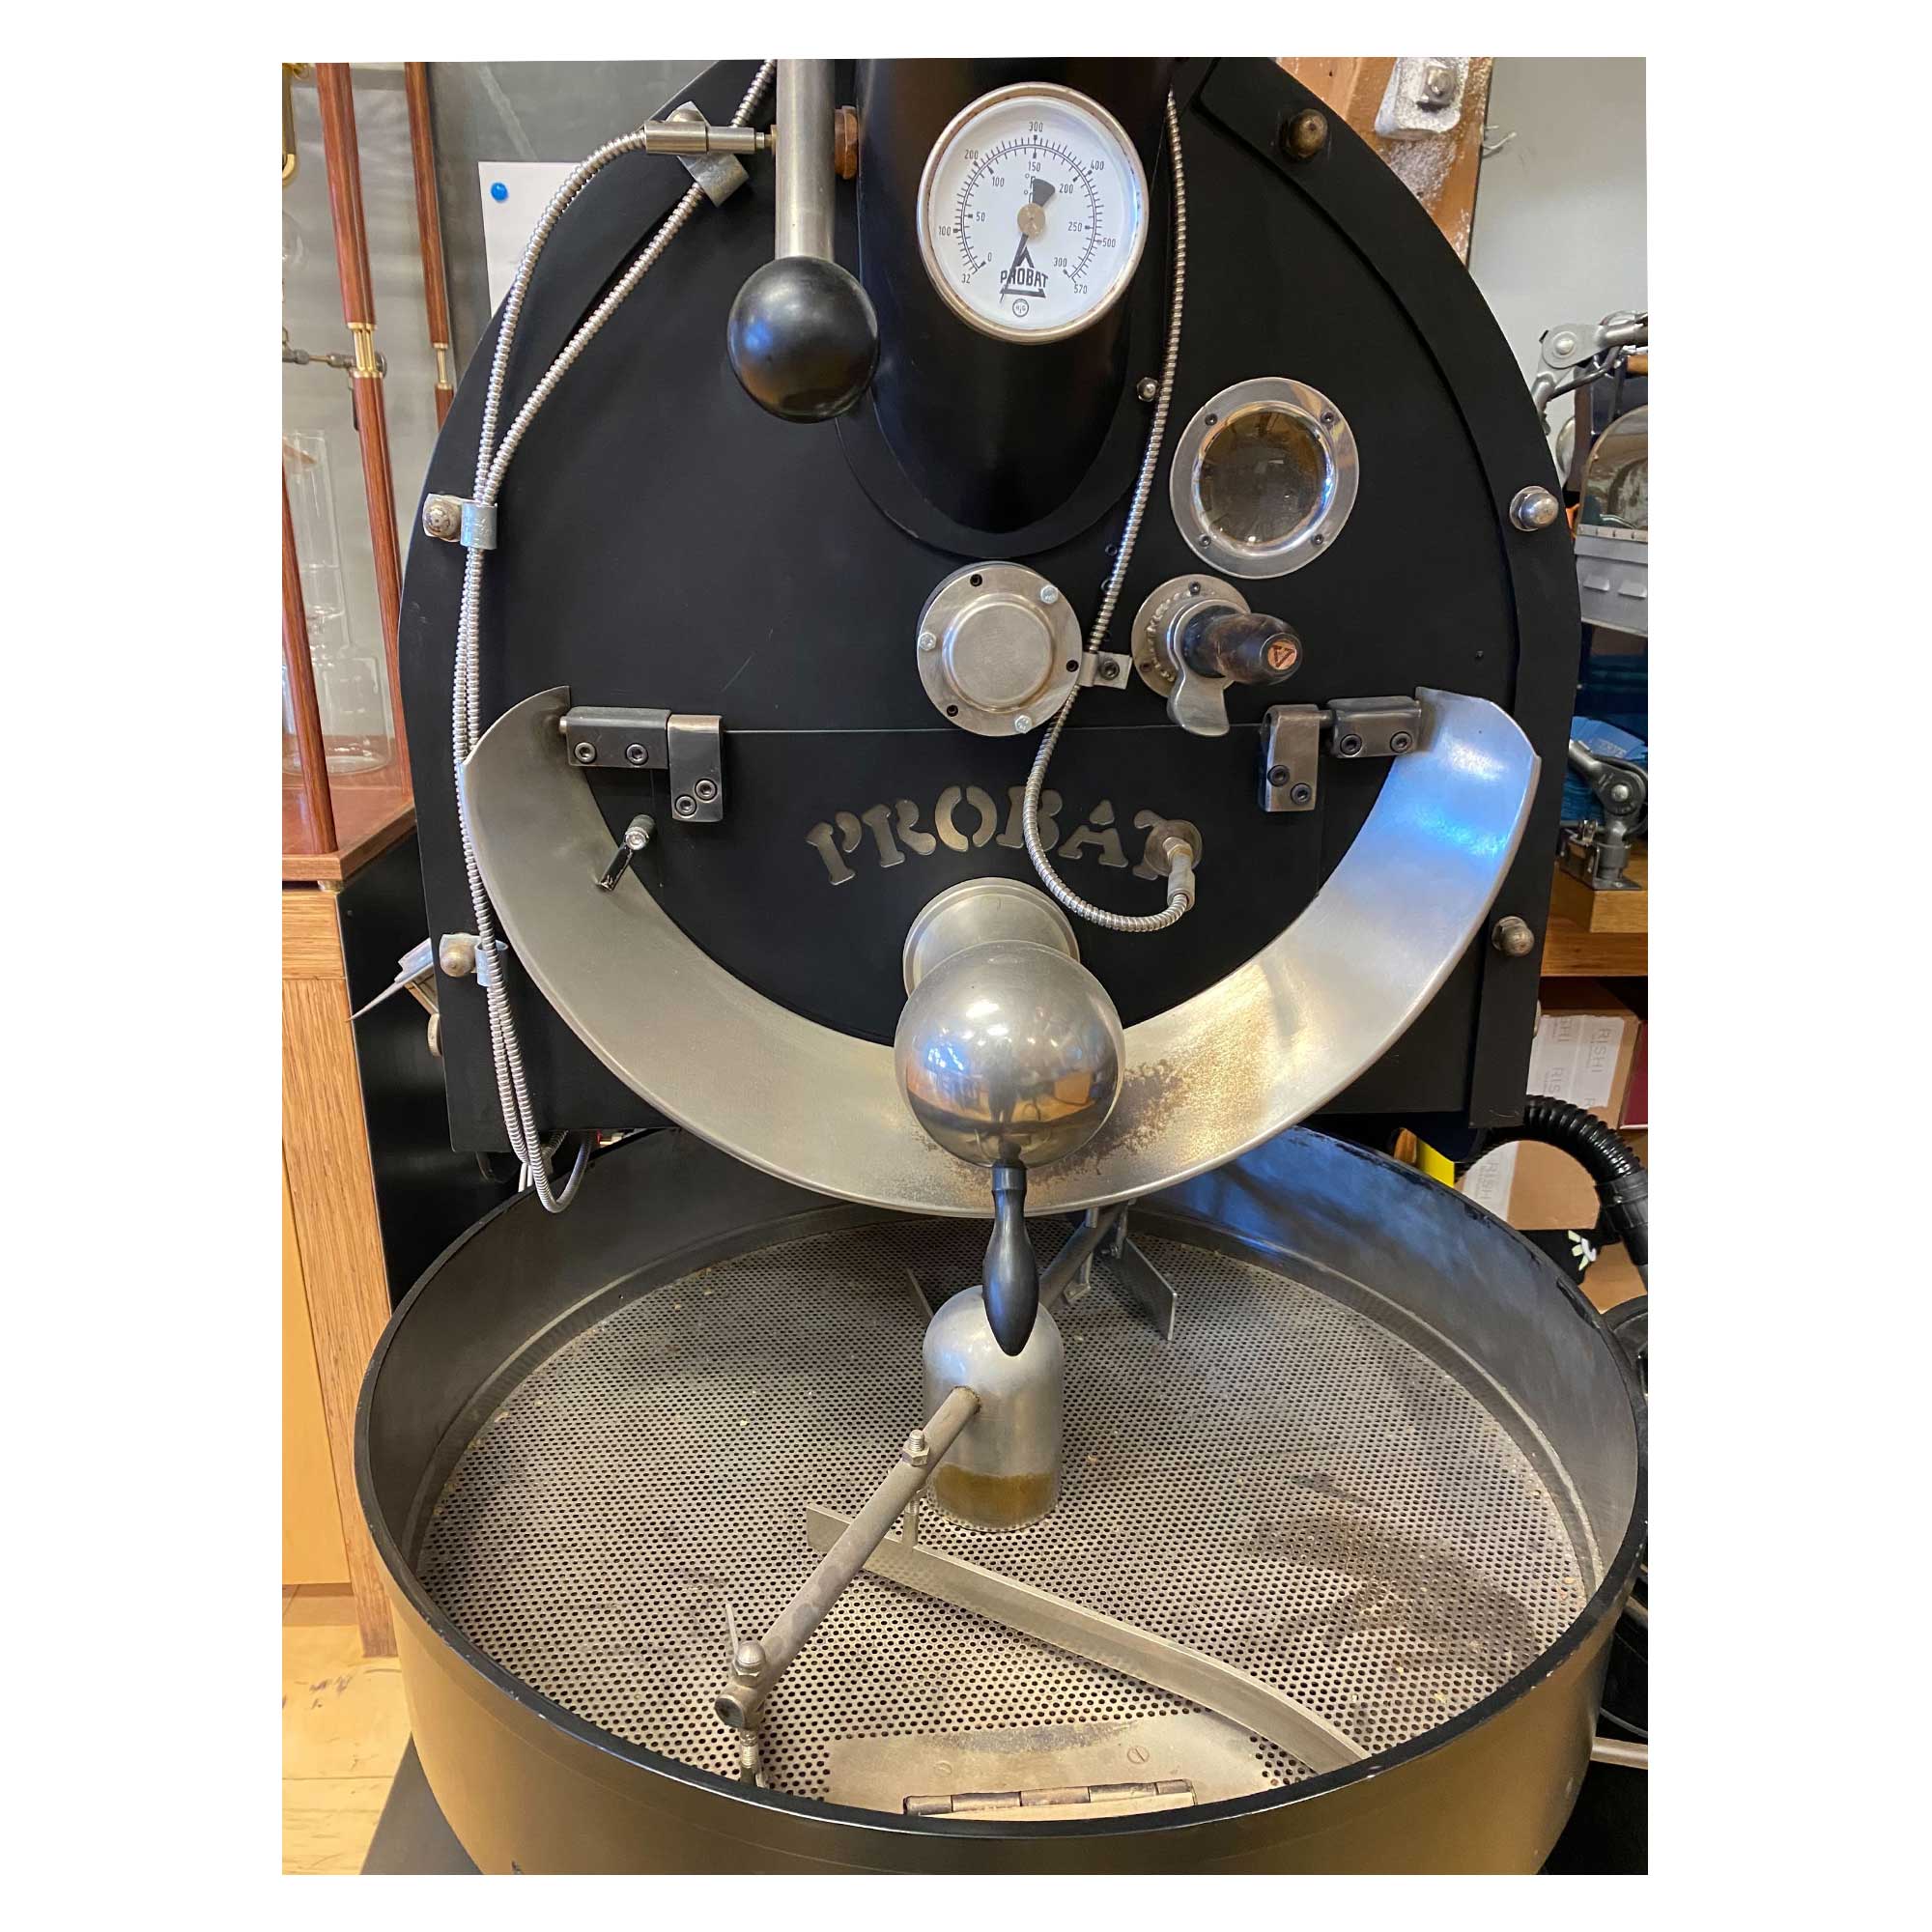 5kg Probat L5 Used Coffee Roaster - 1987 Model - Great Condition